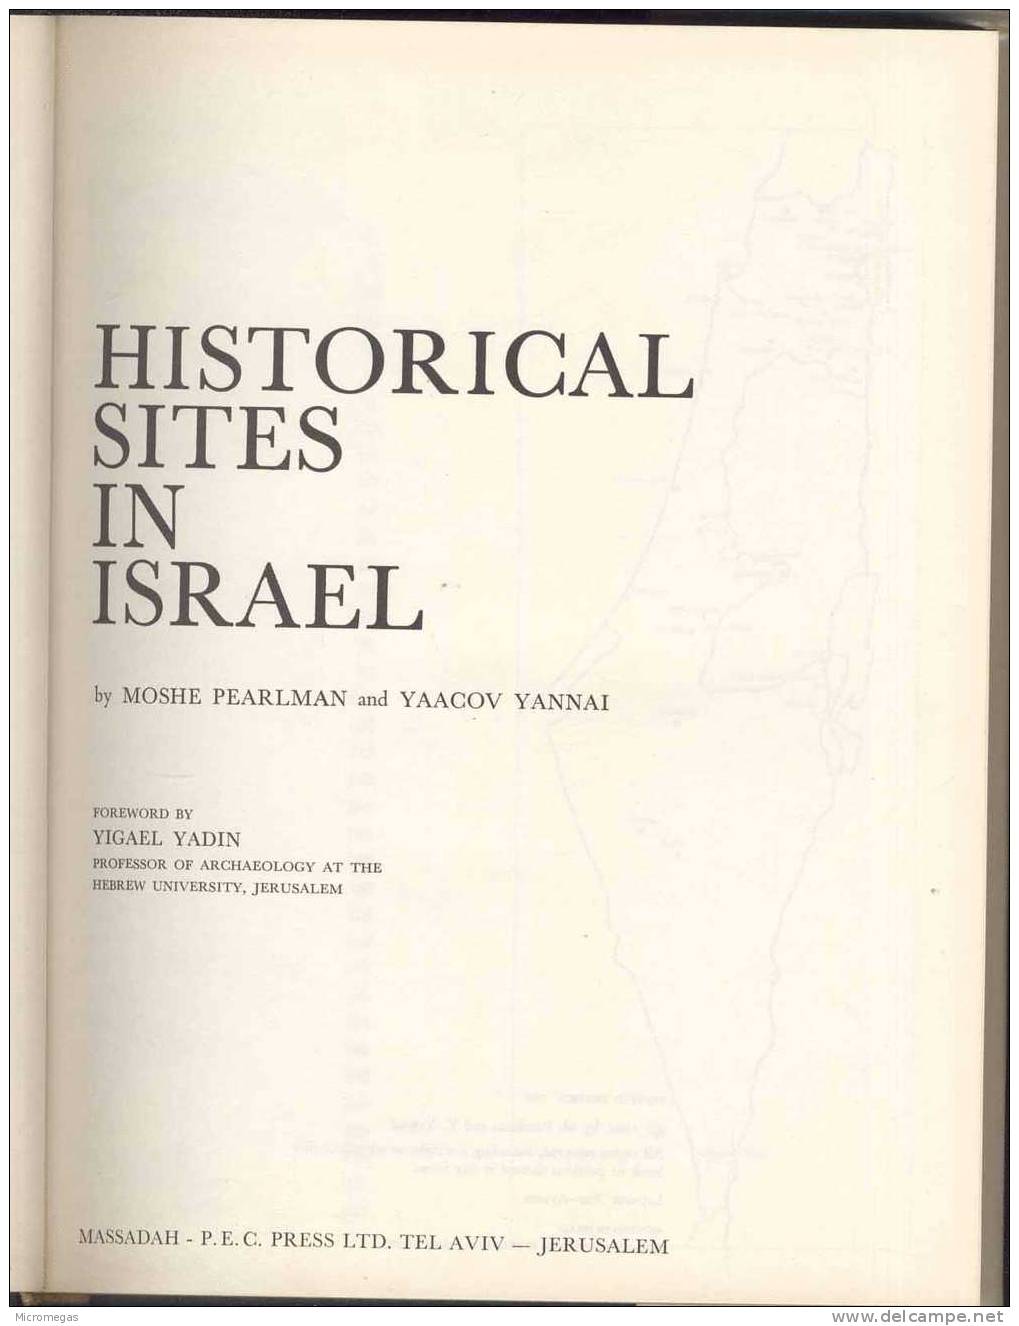 Historical Sites In Israel - Moshe Pearlman And Yaccov Yannai - Midden-Oosten